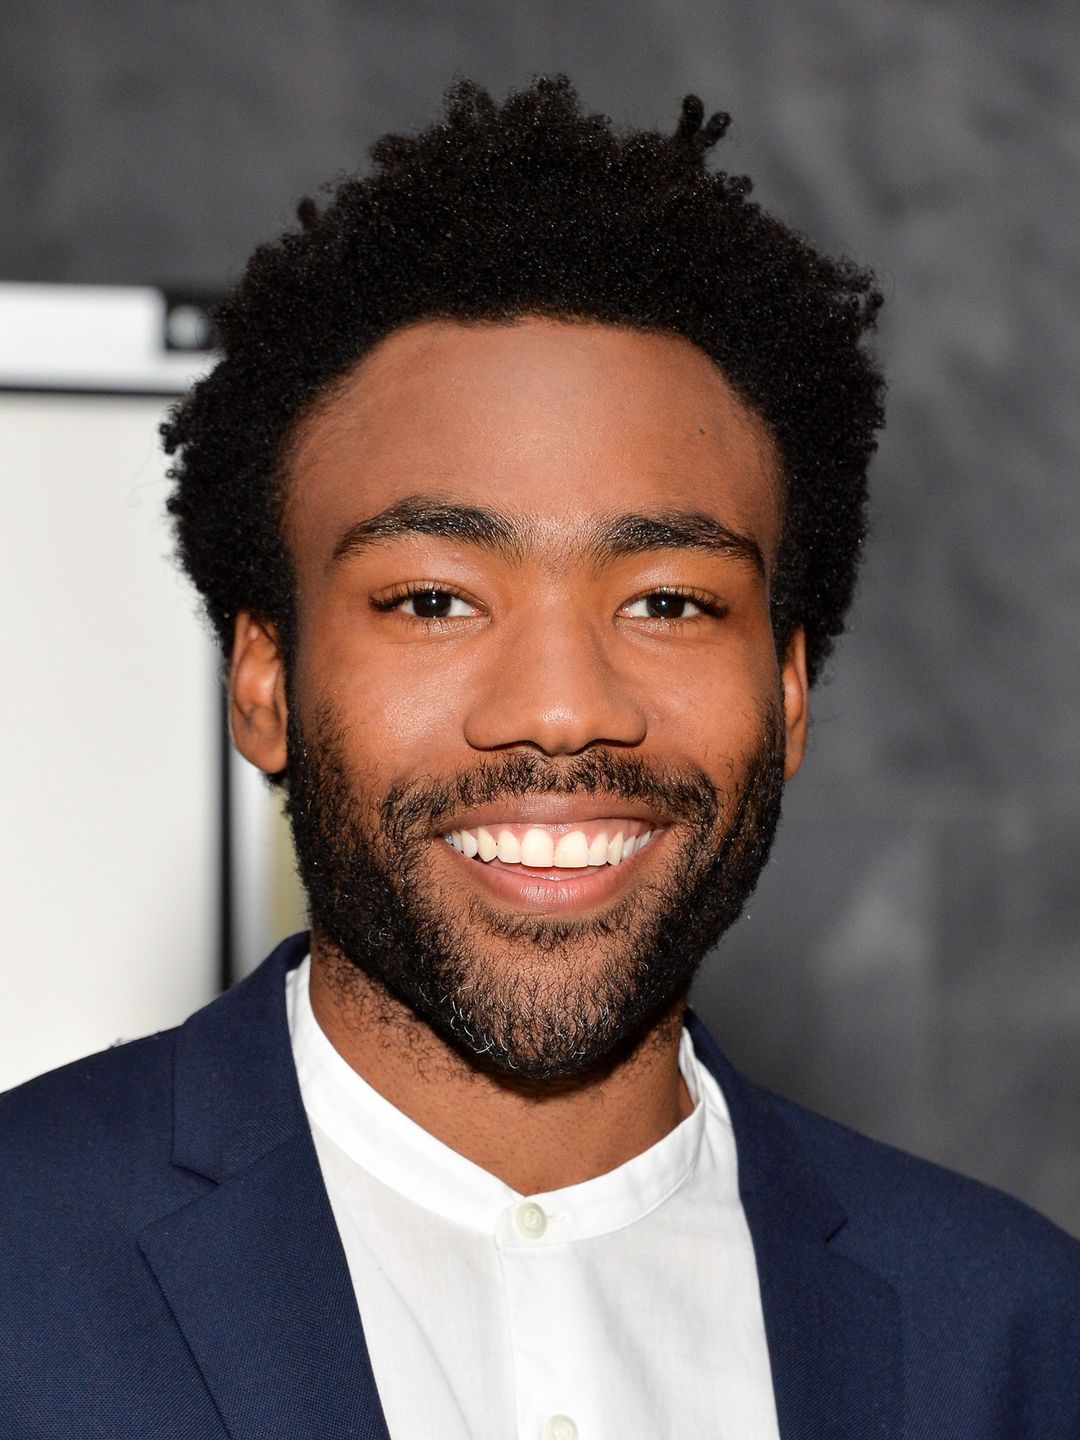 Donald Glover who is his mother